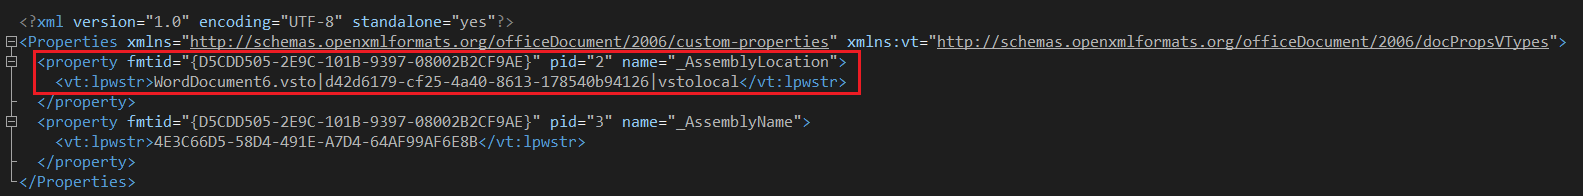 XML code that gives instructions about the add-in